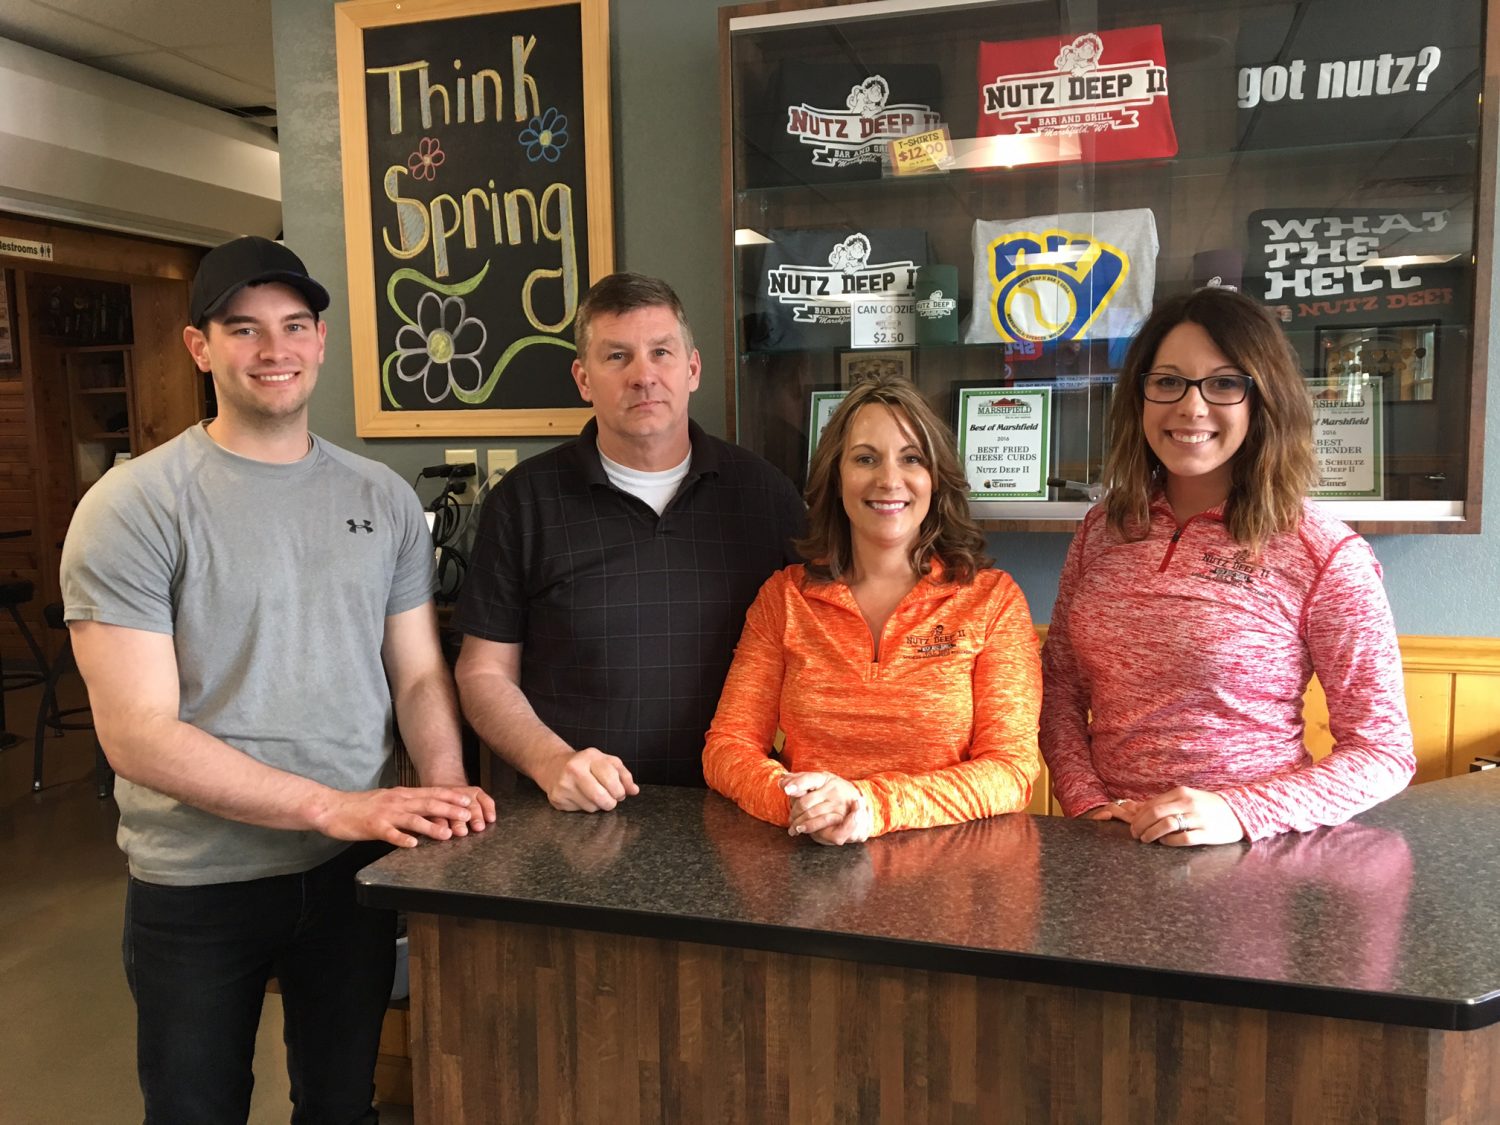 From left: The Schutz family  Andy, Dewey, Lisa, and Ann  has been a staple on the corner of Eighth Street and Central Avenue for over 30 years running Nutz Deep II.